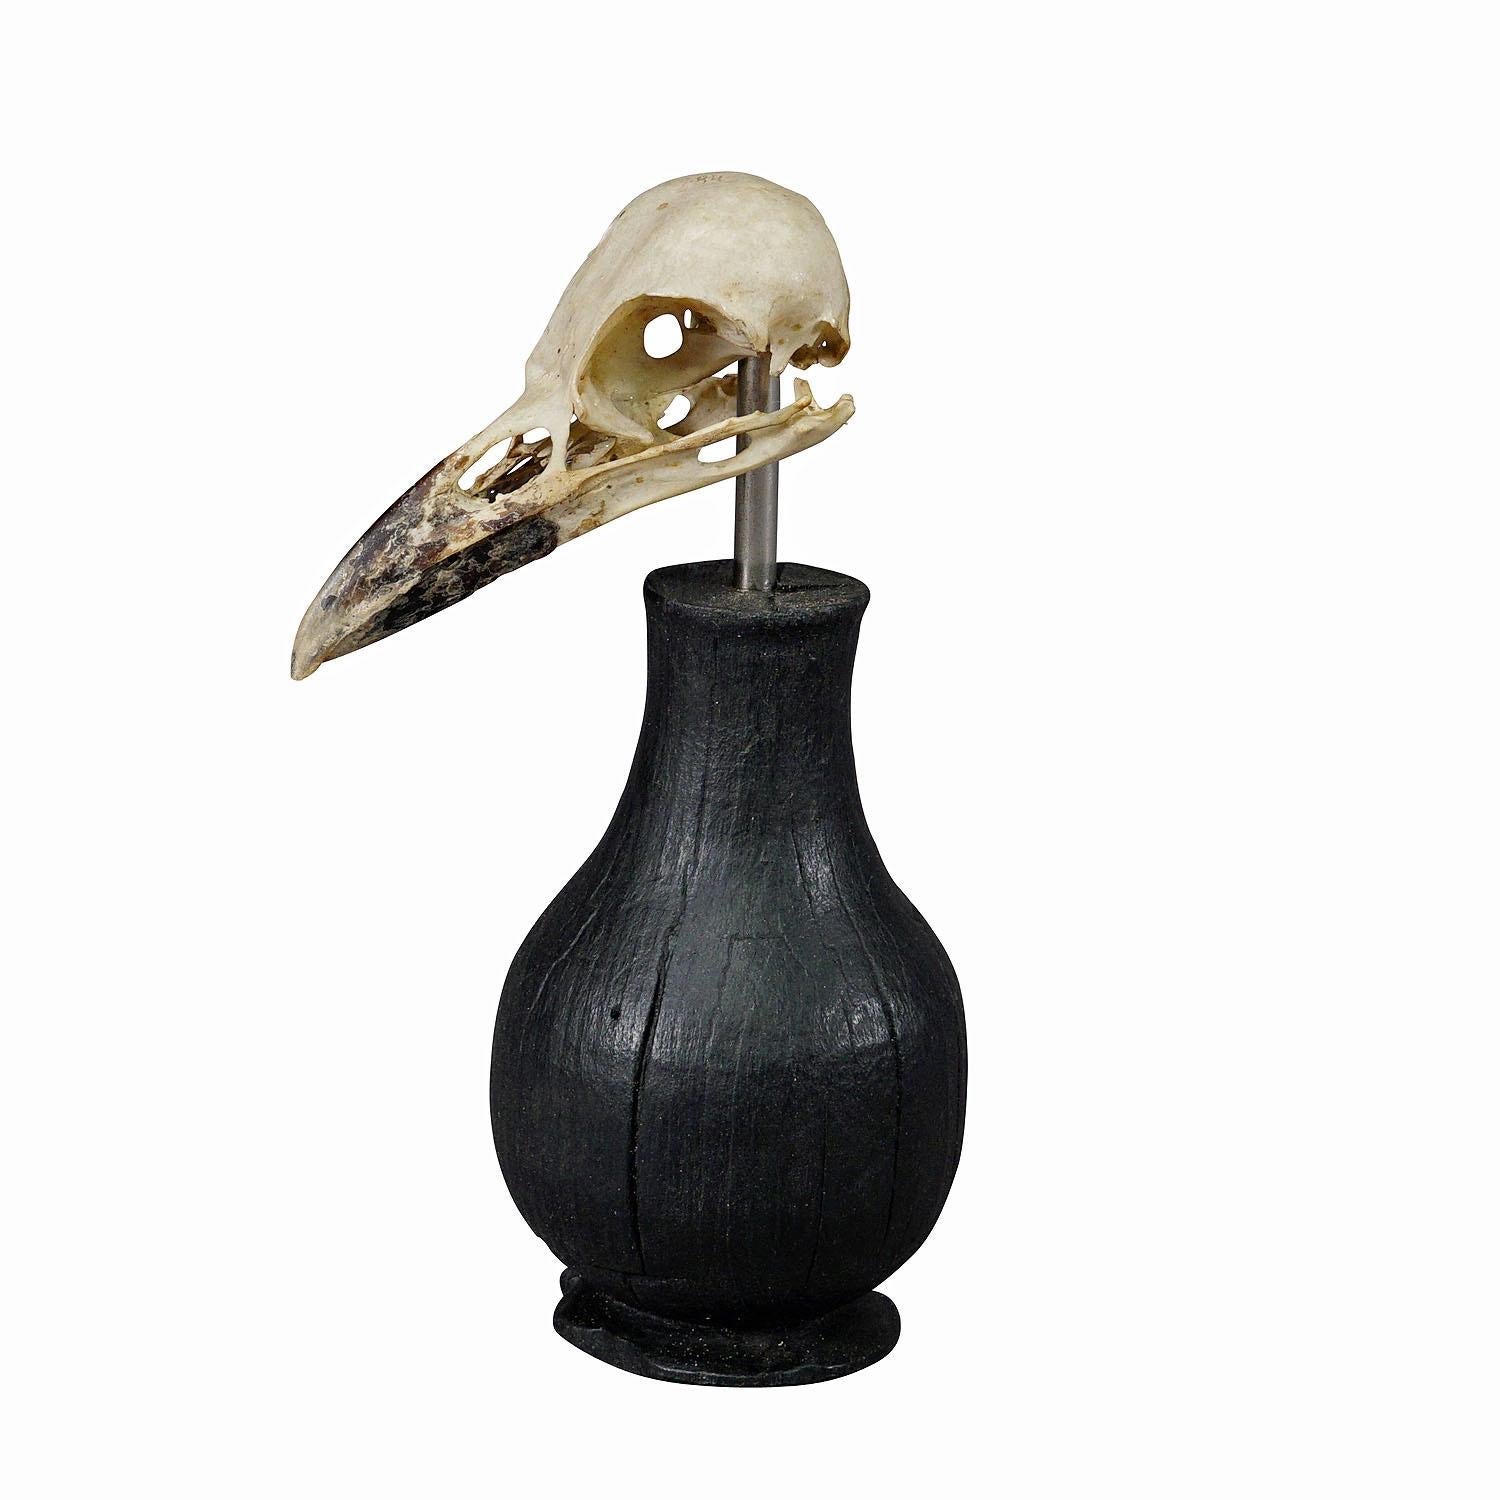 Antique Real Skull of a Crow or Magpie, Germany ca. 1900s

An antique taxidermied skull of the crow (Corvidae) mounted on an ebonized wooden turned base. Derived from the biological collection of monastery Weissenhorn in Southern Germany. 

This